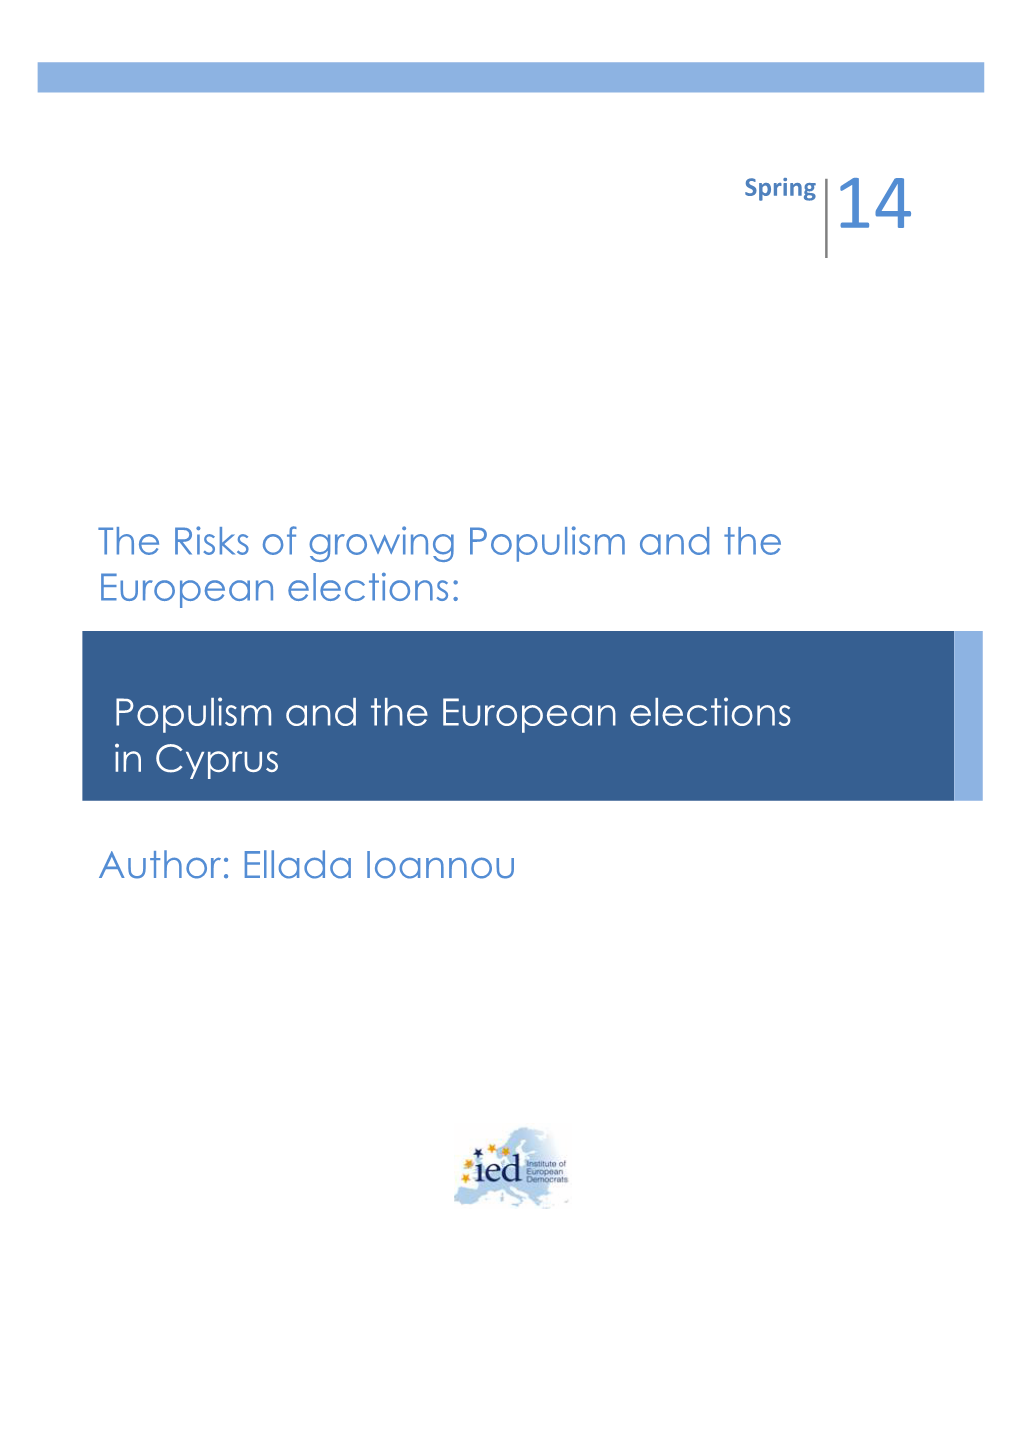 Ellada Ioannou Populism and the European Elections in Cyprus